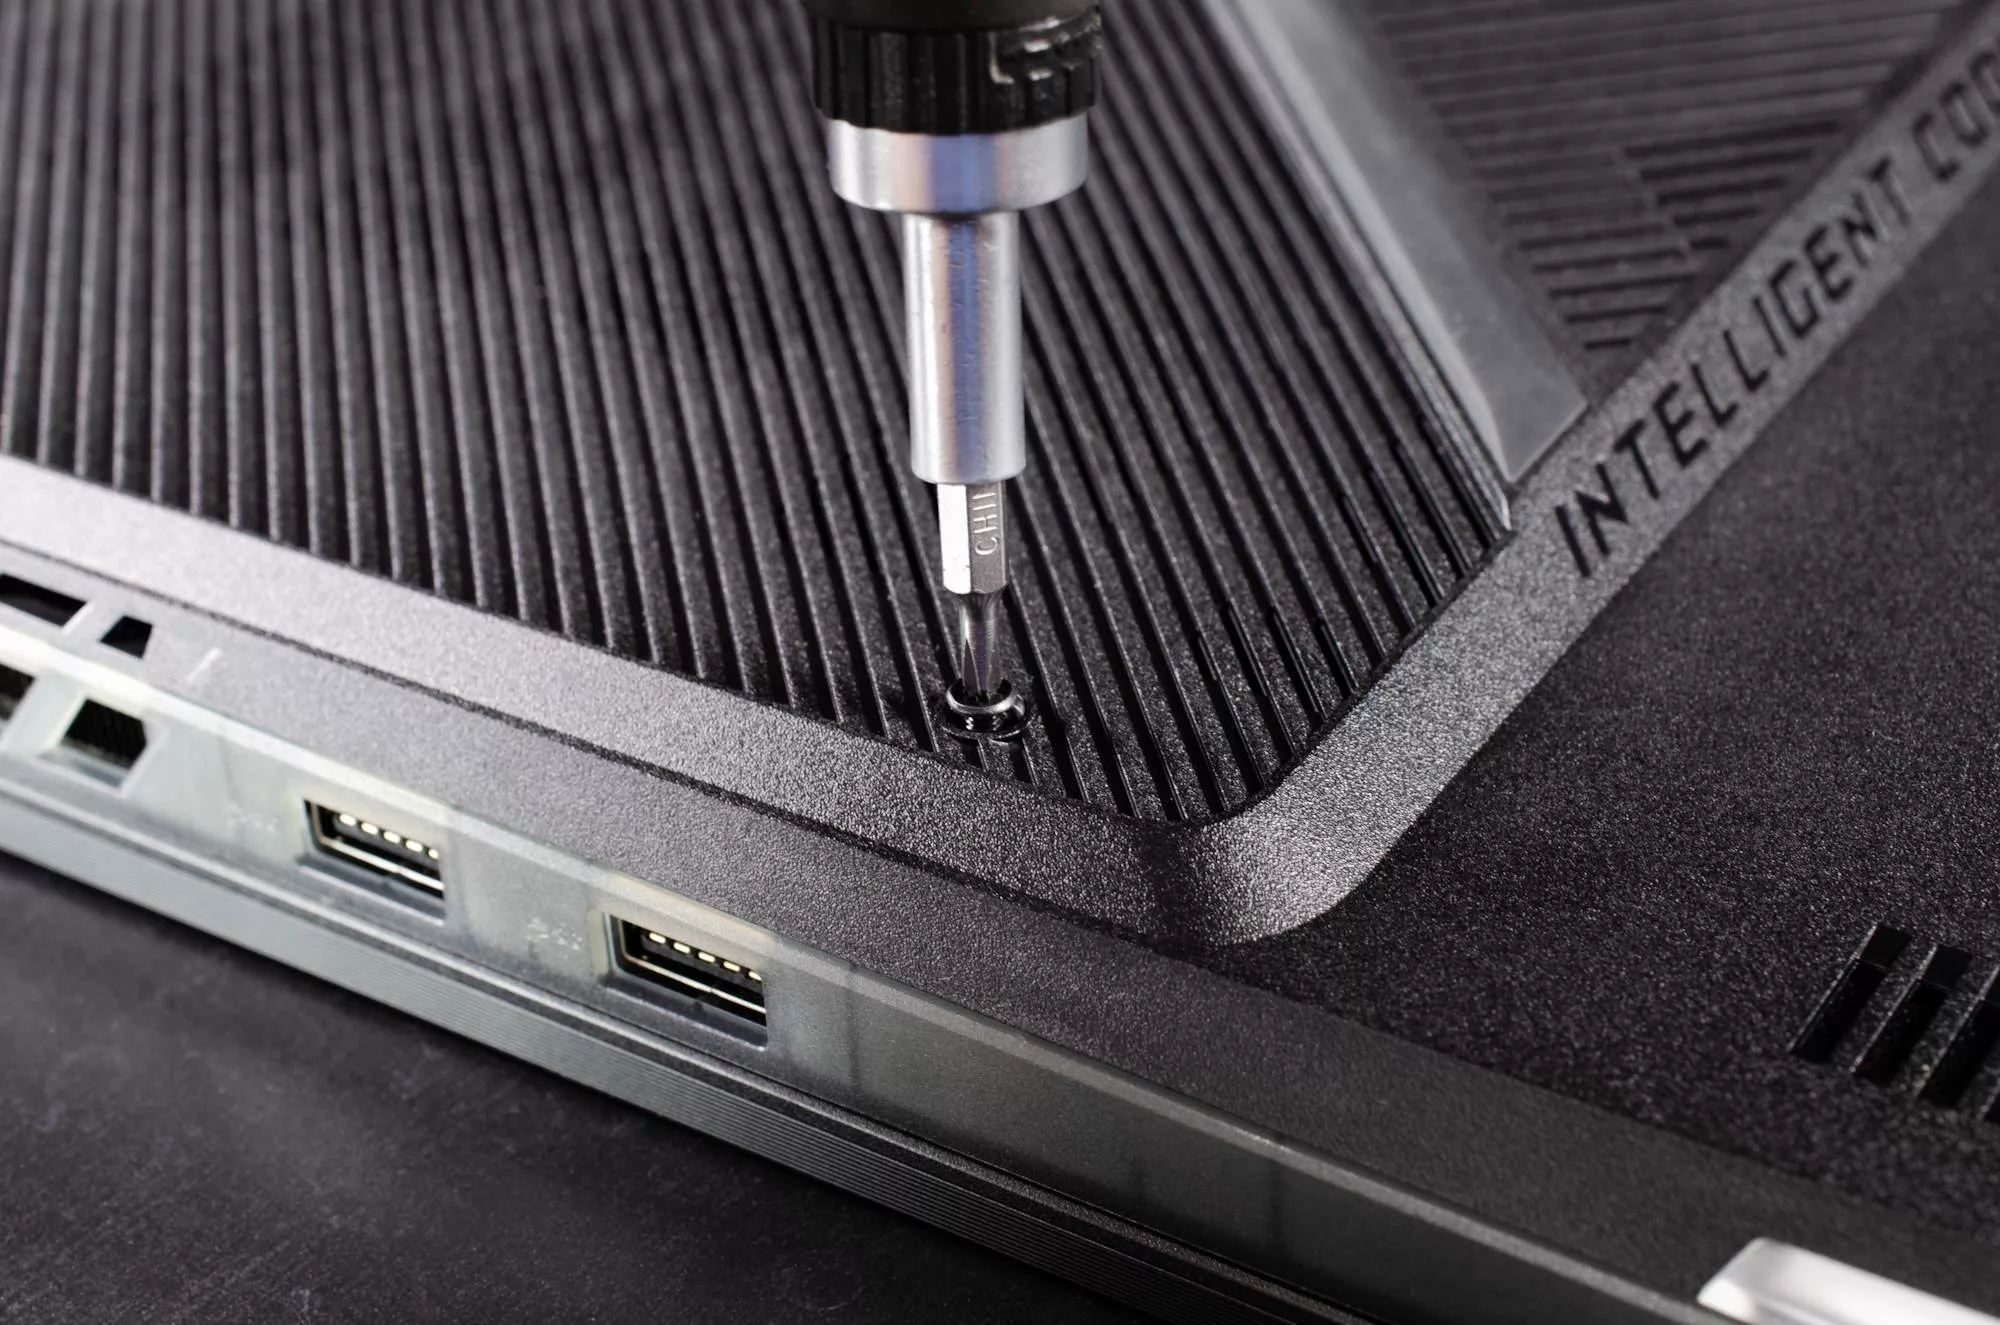 A closeup view of a screwdriver loosening the captive screw that holds the bottom panel of the ROG Strix SCAR 18 in place